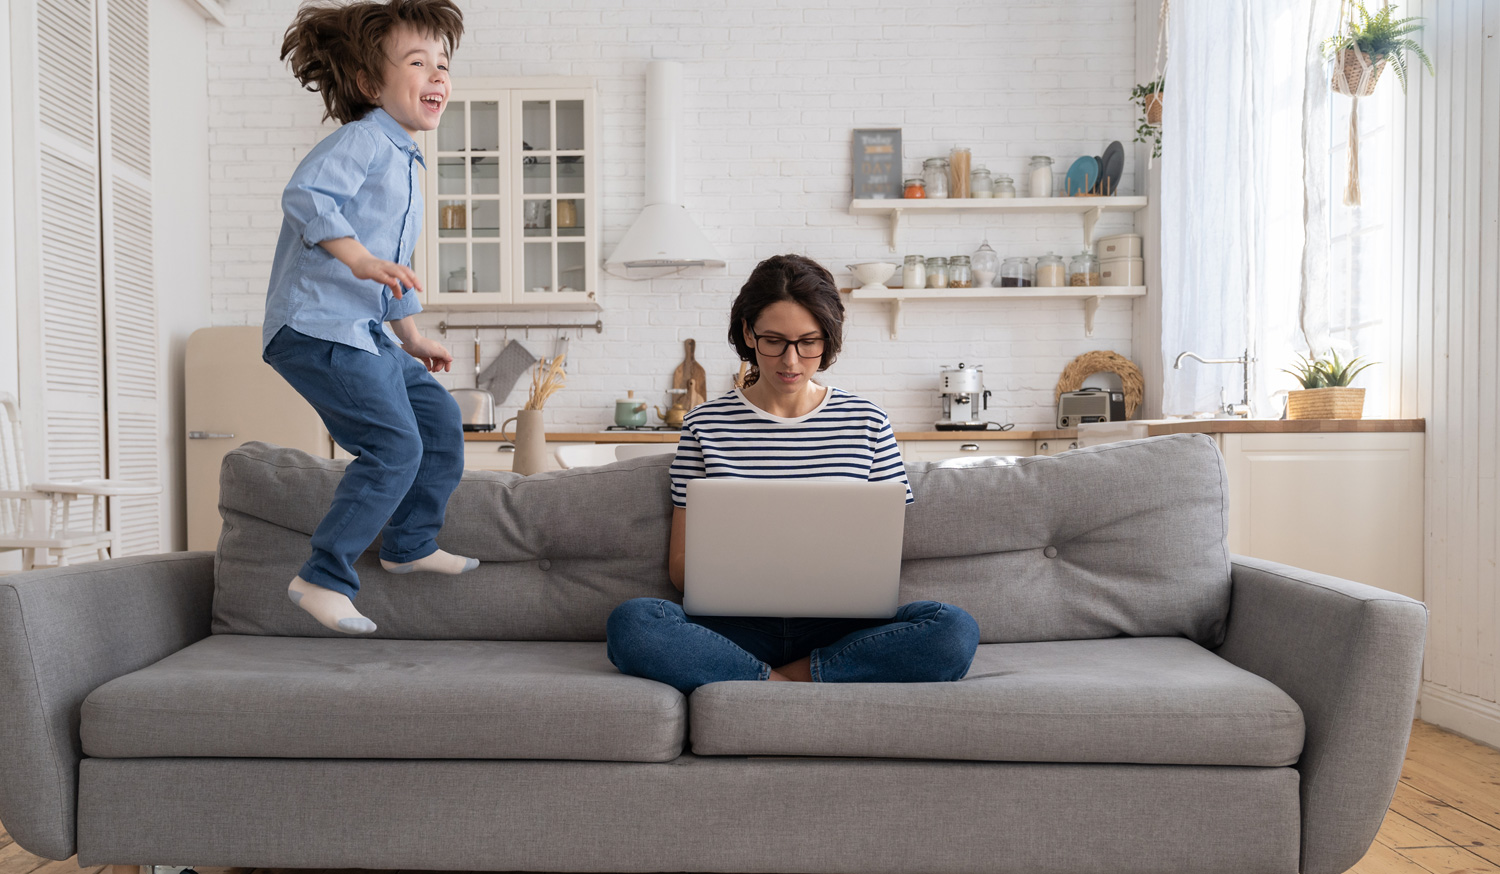 Flexible Working & Childcare for working parents